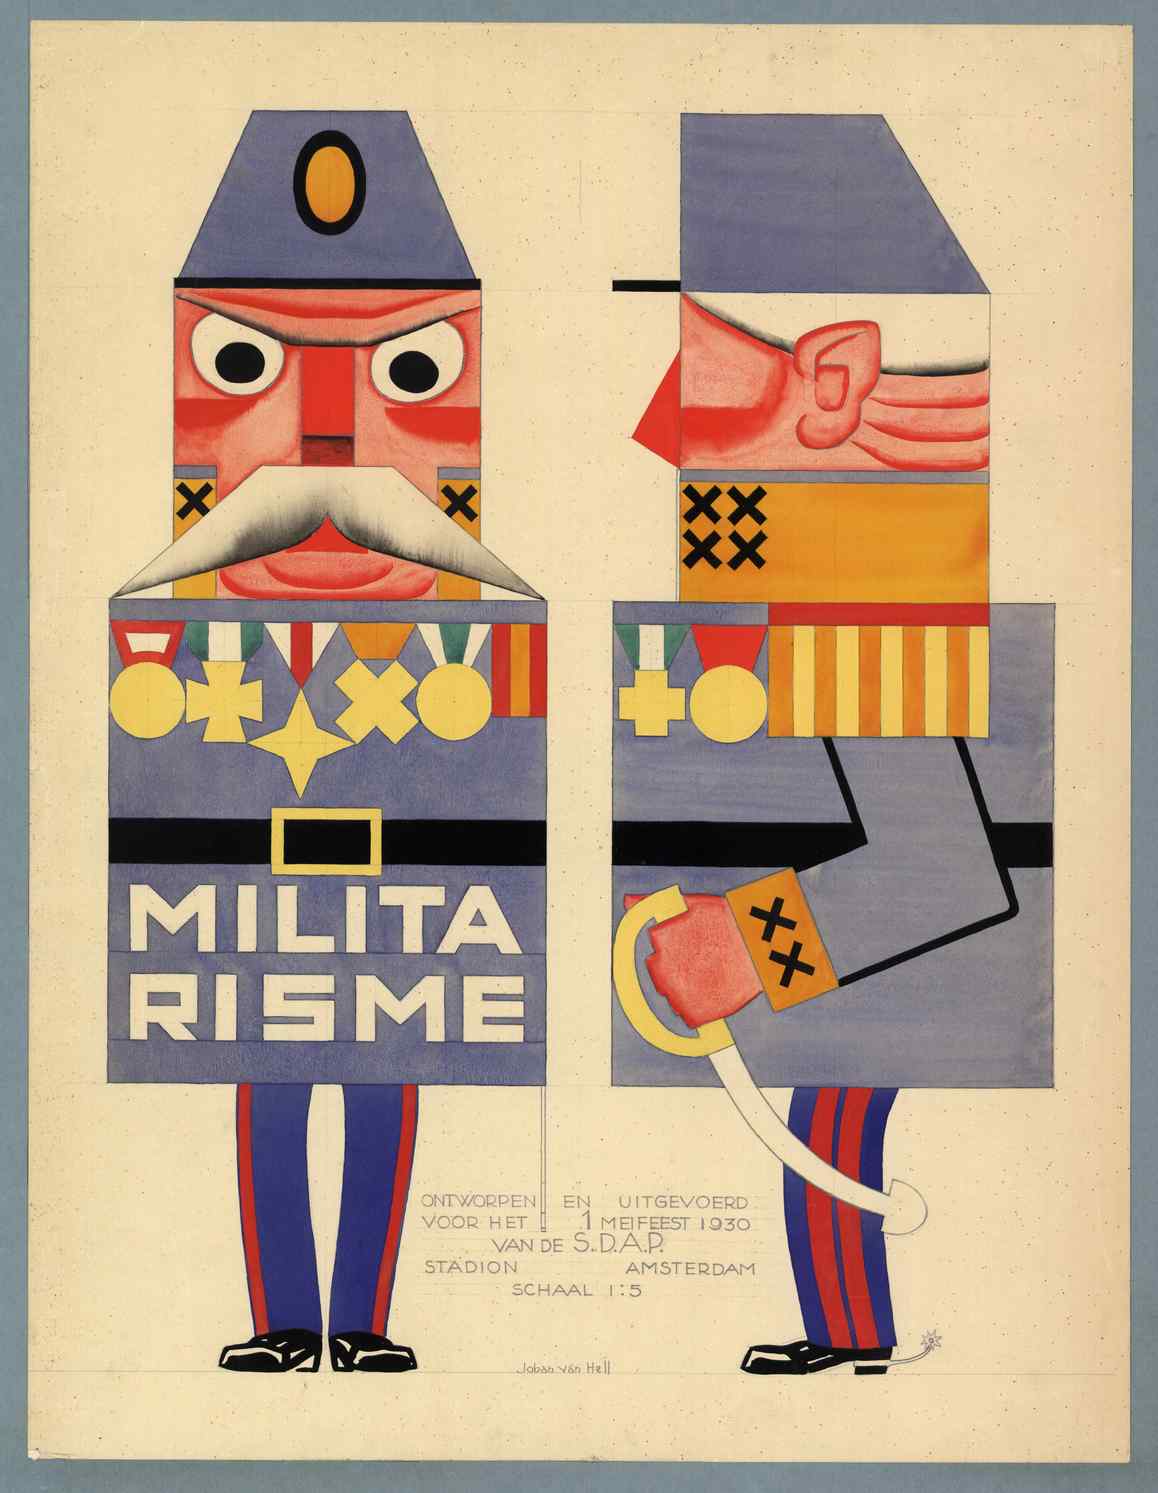 IISH Collections | Book blog | Johan van Hell - Design for 1 may celebration in Olympic Stadium Amsterdam (1930)